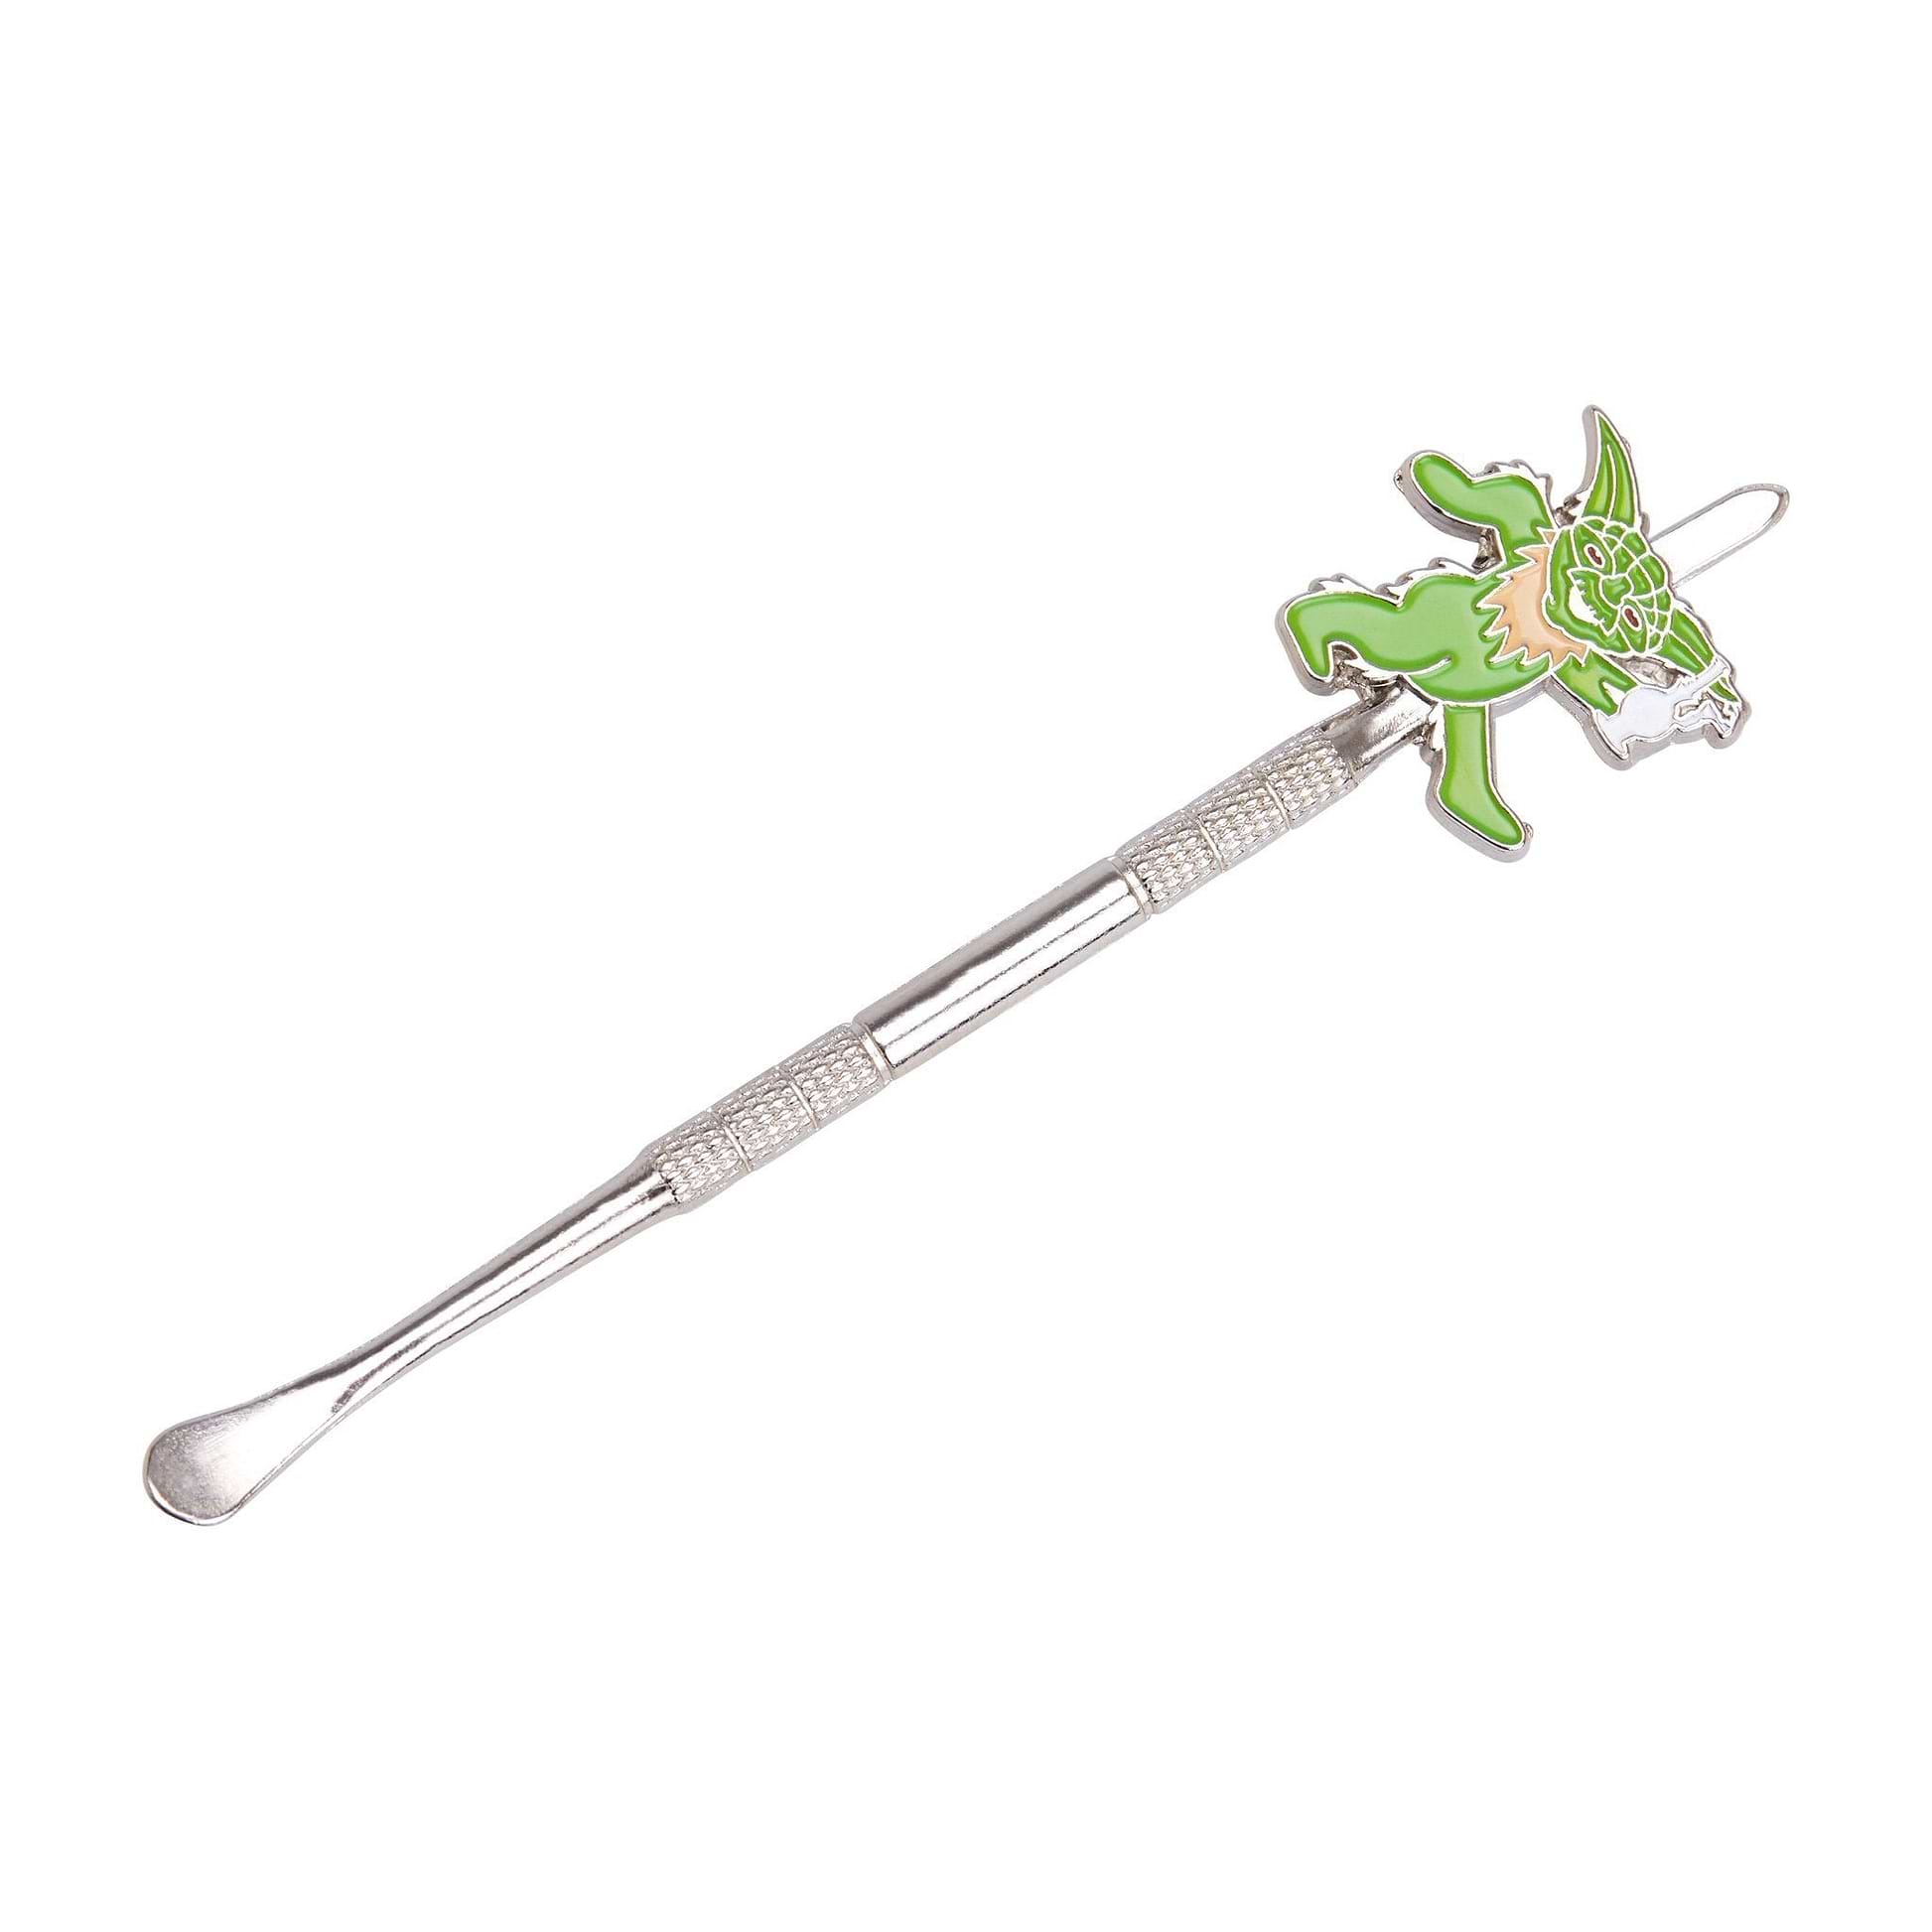 Stainless steel dab tool textured middle part for easy grip with a funny toking Goblin design on the handle